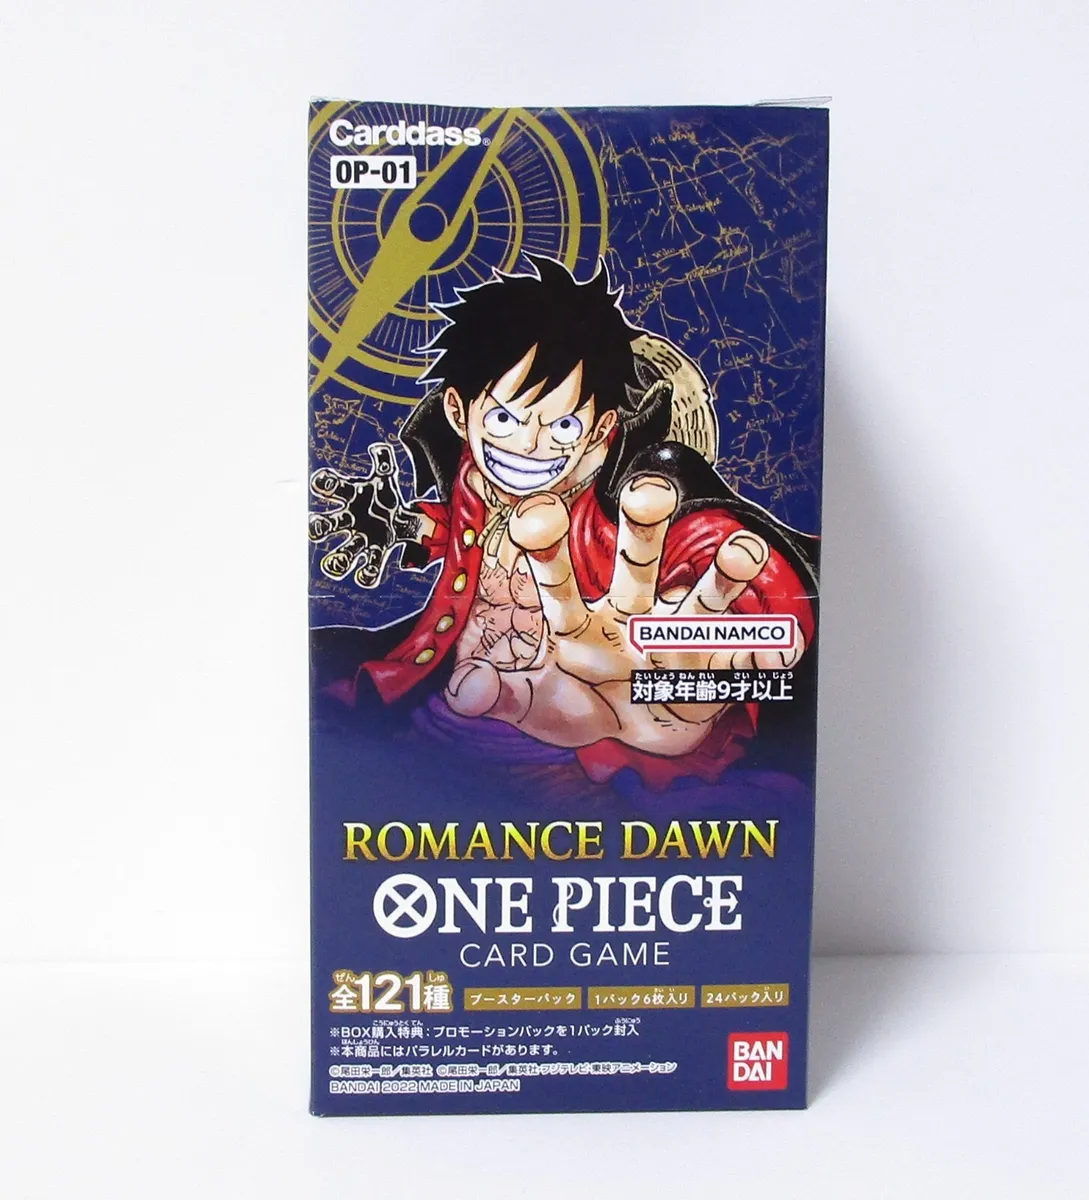 One Piece Trading Card Game Romance Dawn OP-01 Booster Box